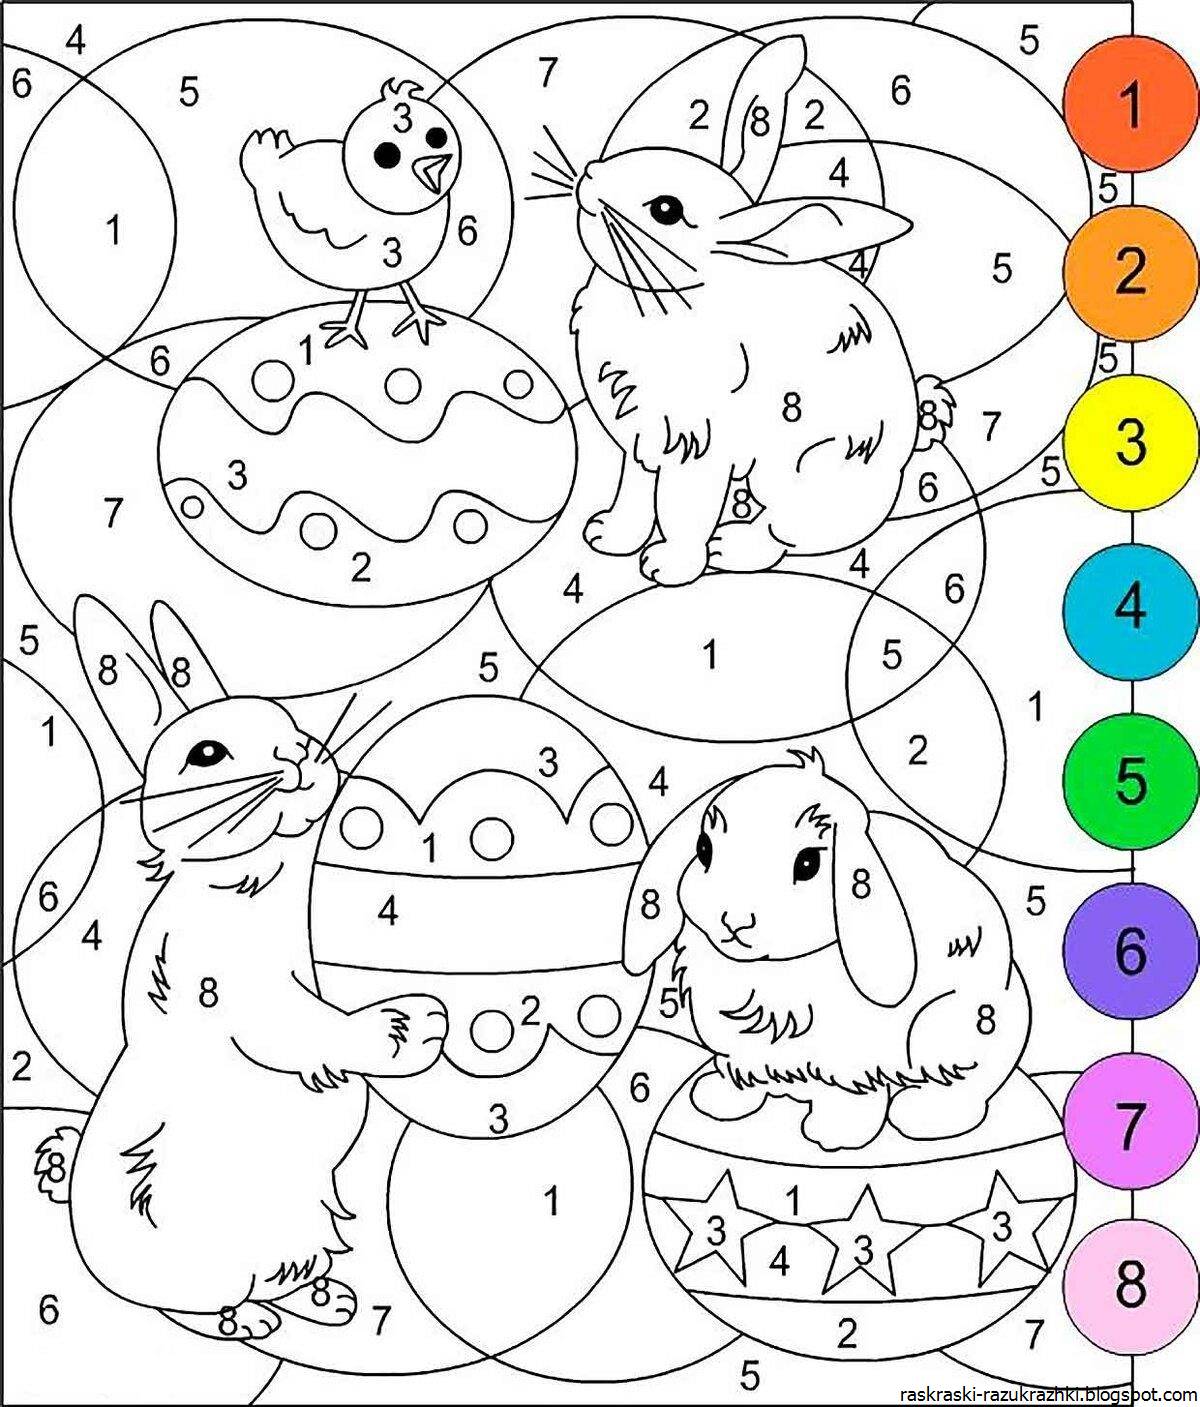 Joyful coloring by numbers for children 5-6 years old